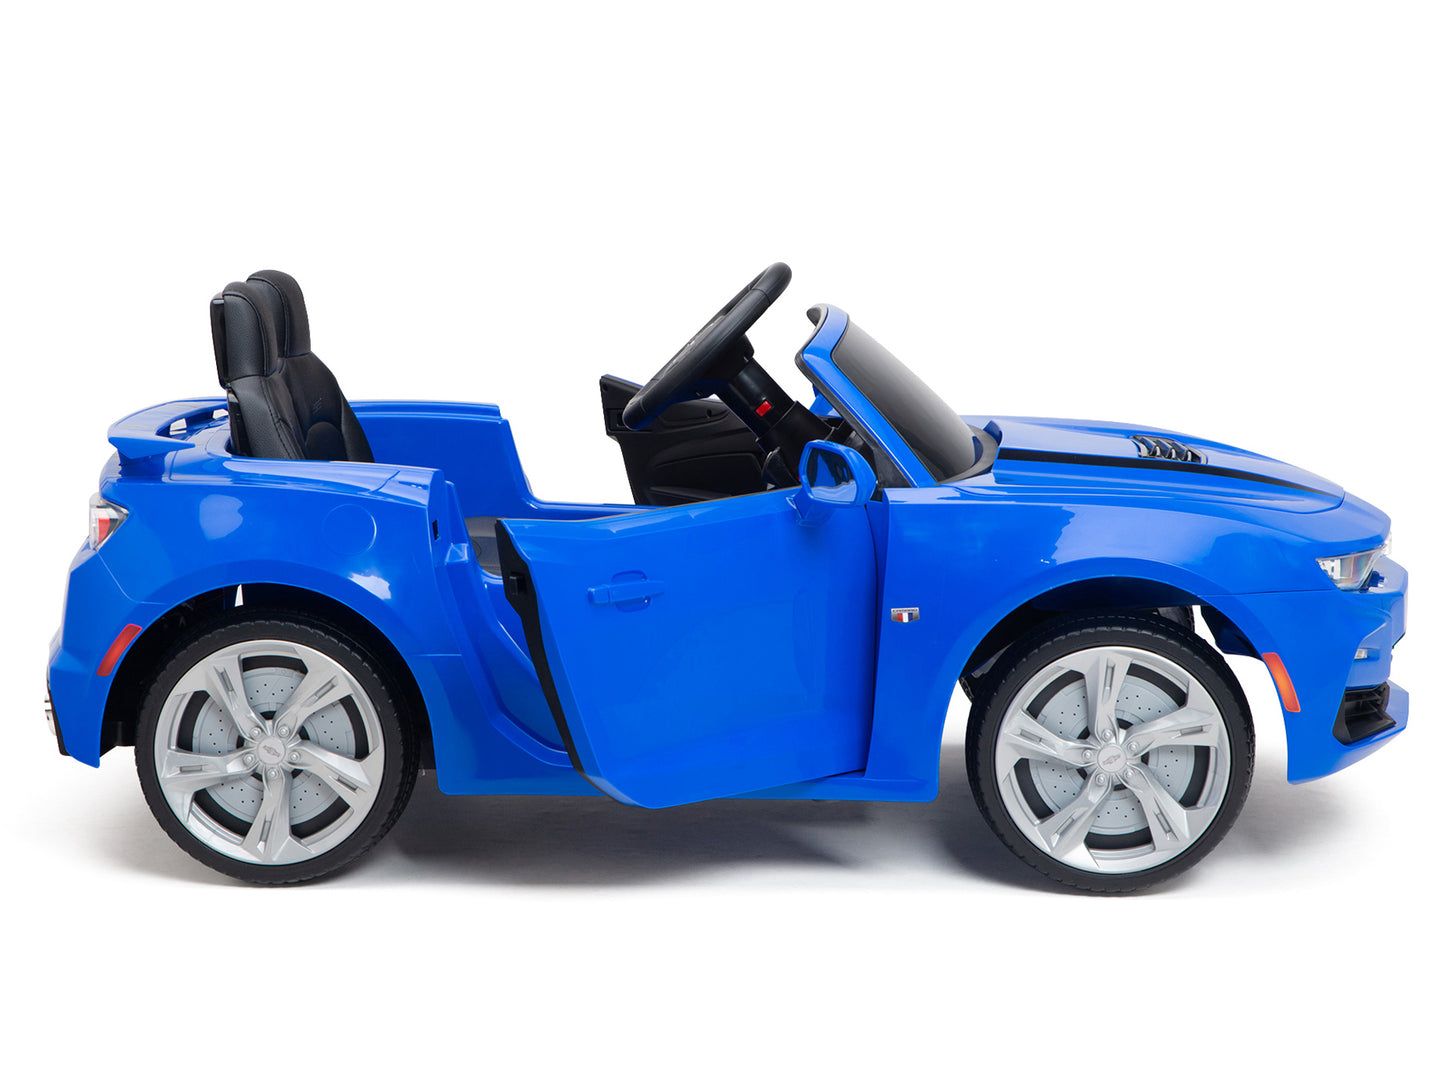 12V Chevrolet Camaro 2SS Kids Ride On Car with Remote Control - Blue